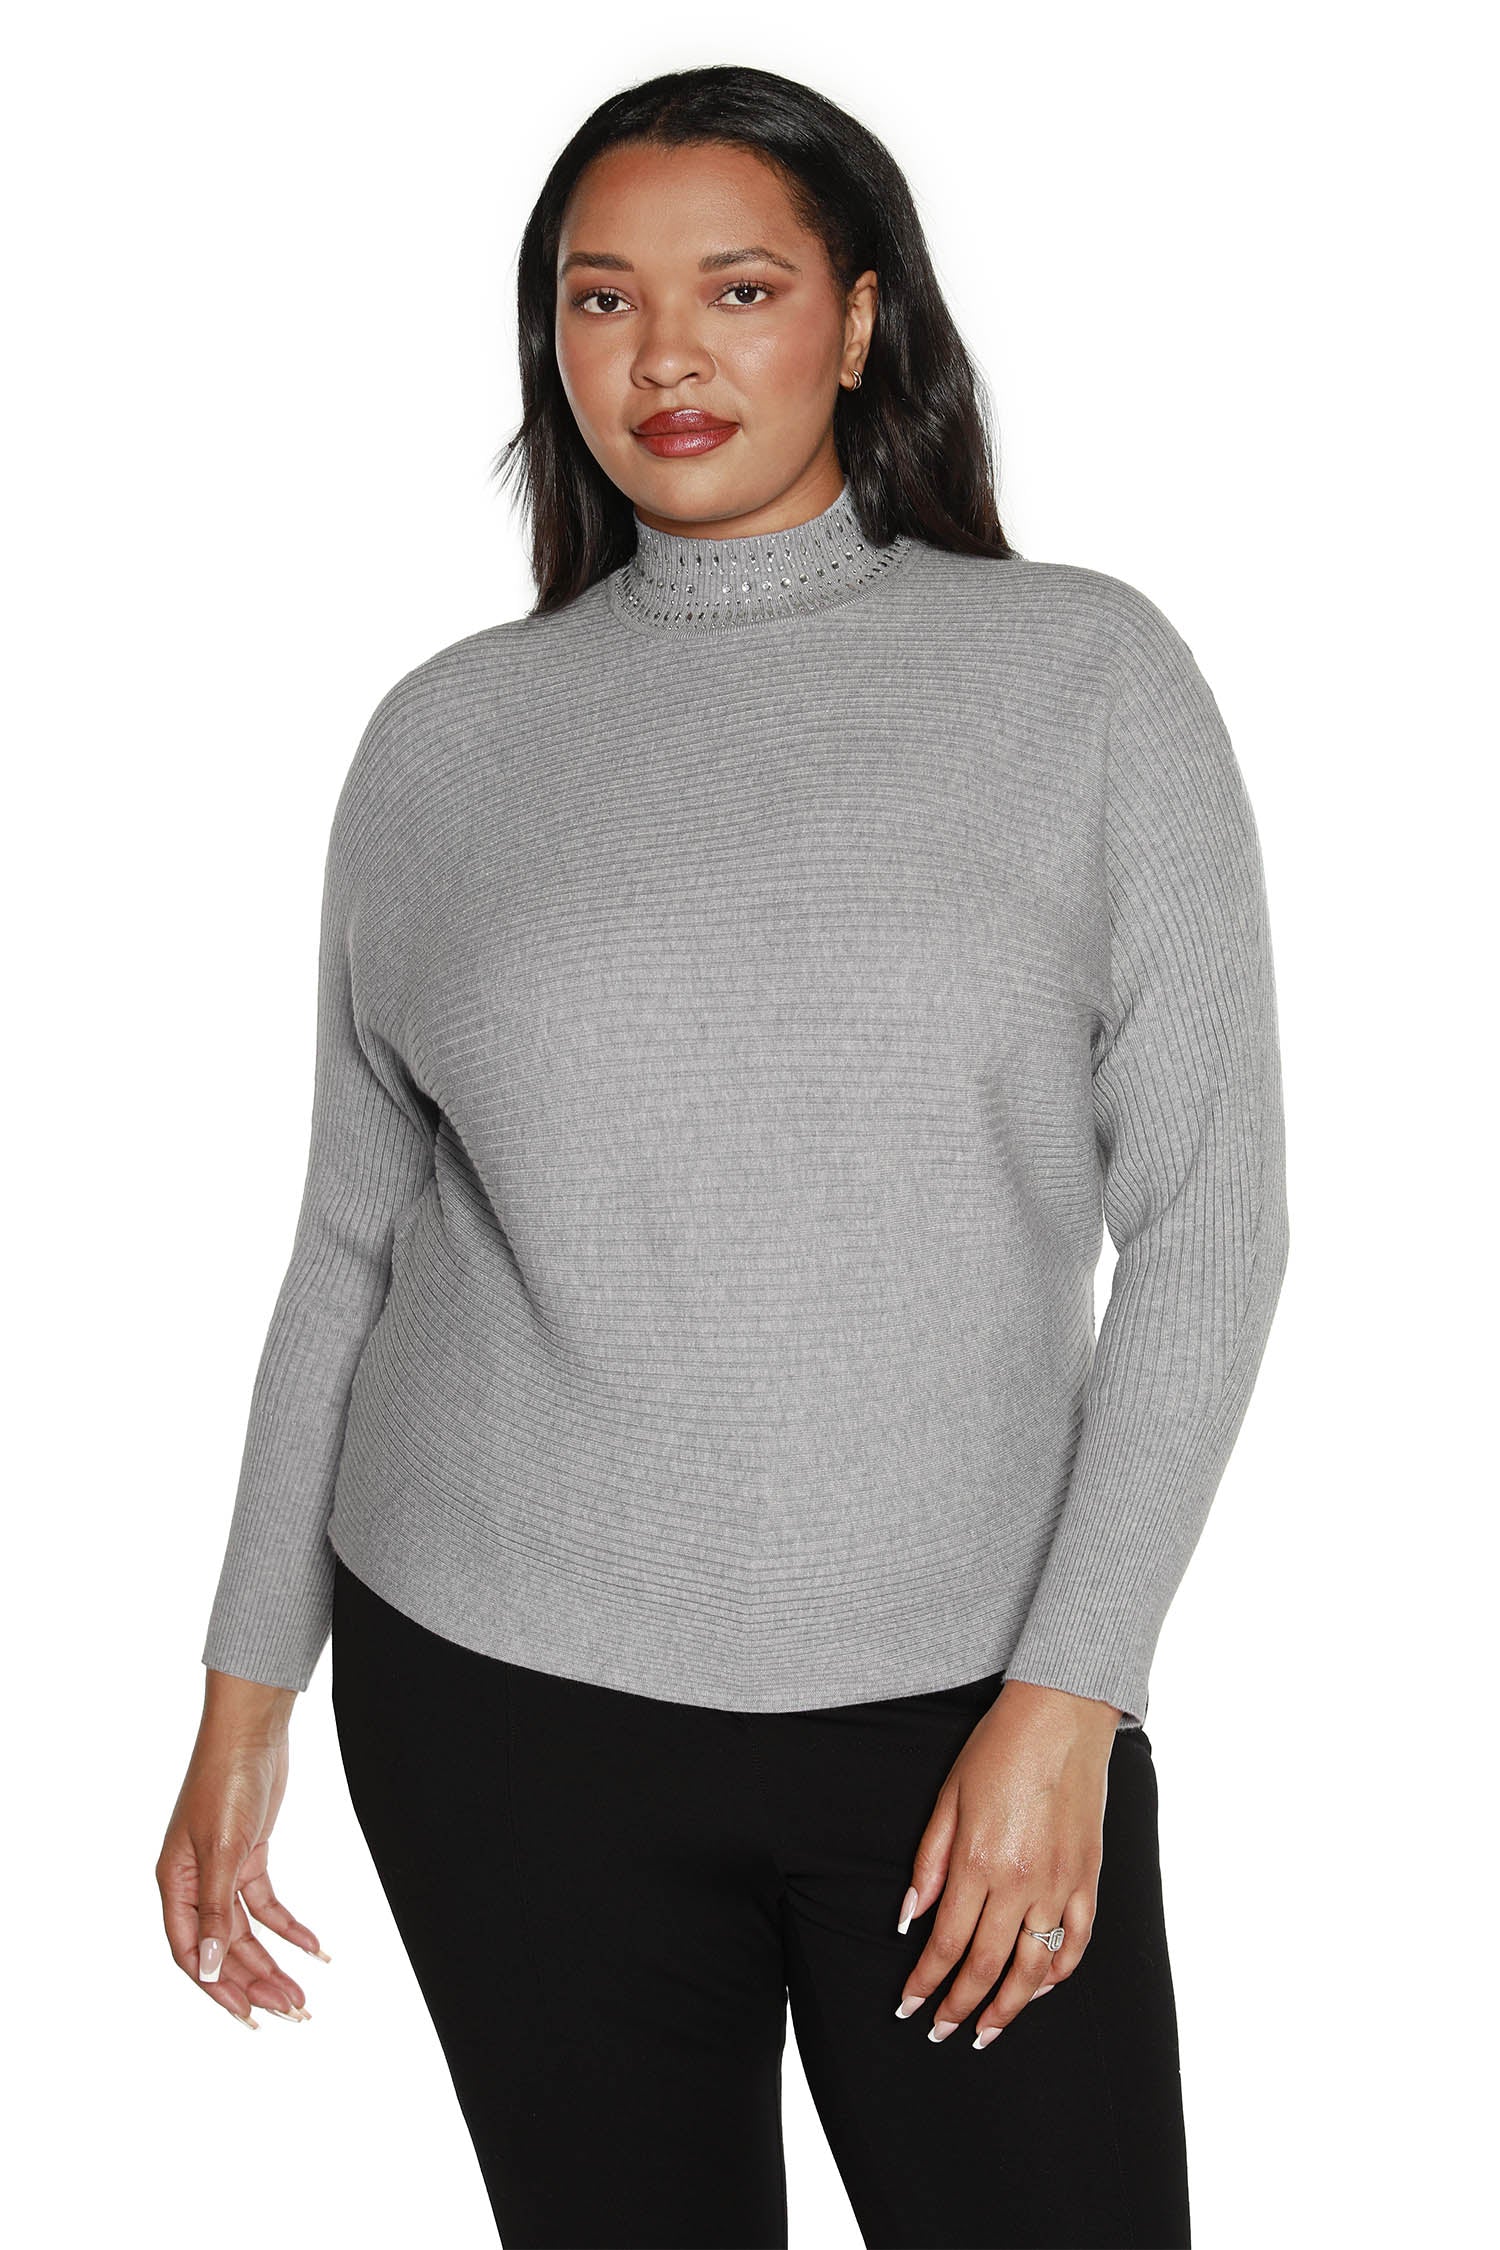 Women's Long Sleeve Sweater in a Ribbed Knit with Dolman Sleeves and Rhinestone Detailed Mock Neck | Curvy